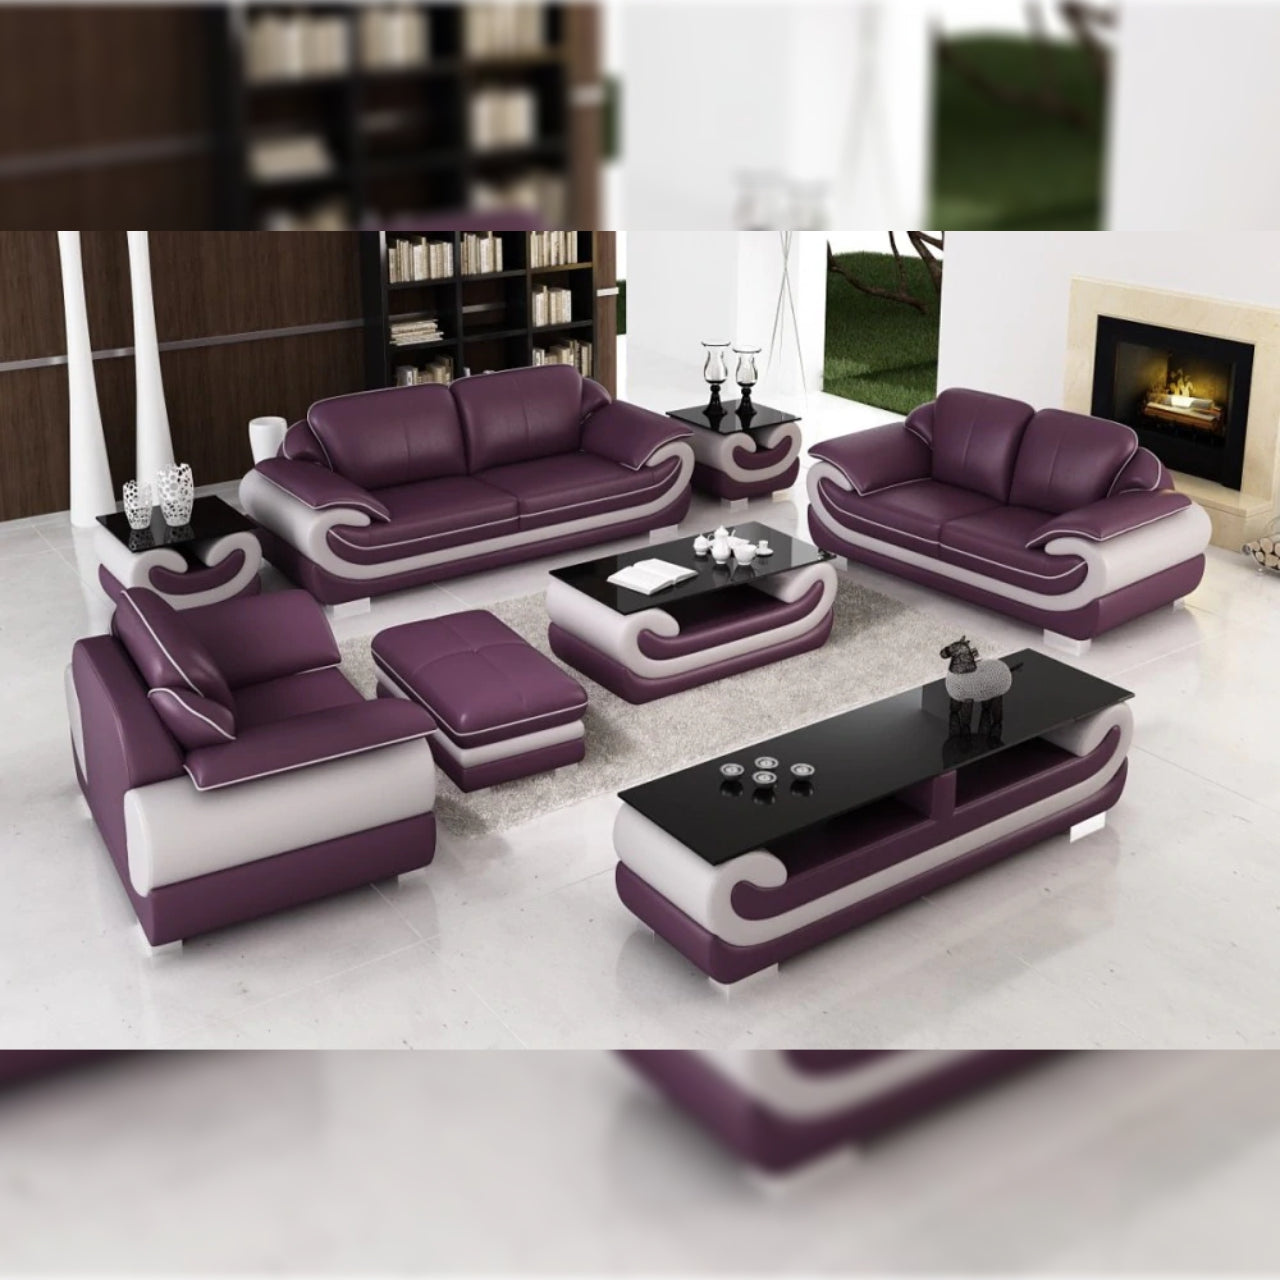 Buy Luxury Sofa Sets Online @Best Prices in India! | GKW Retail